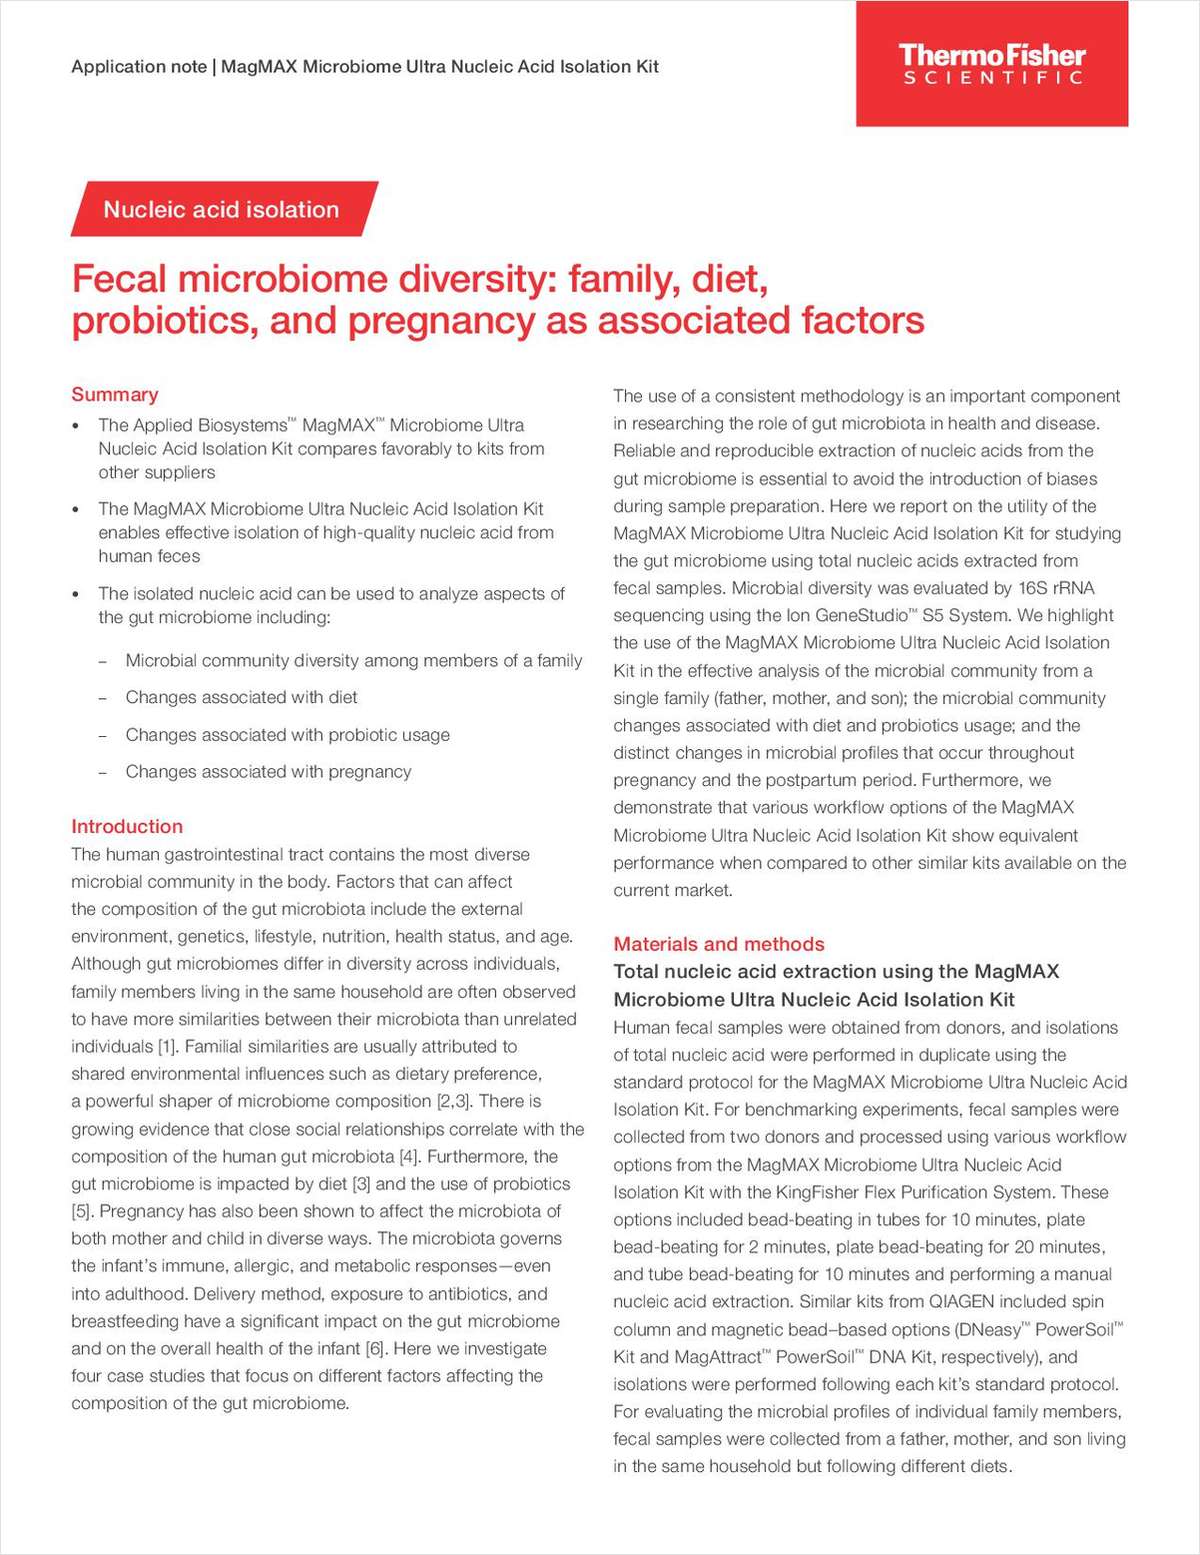 Fecal Microbiome Diversity: Family, Diet, Probiotics, and Pregnancy as Associated Factors